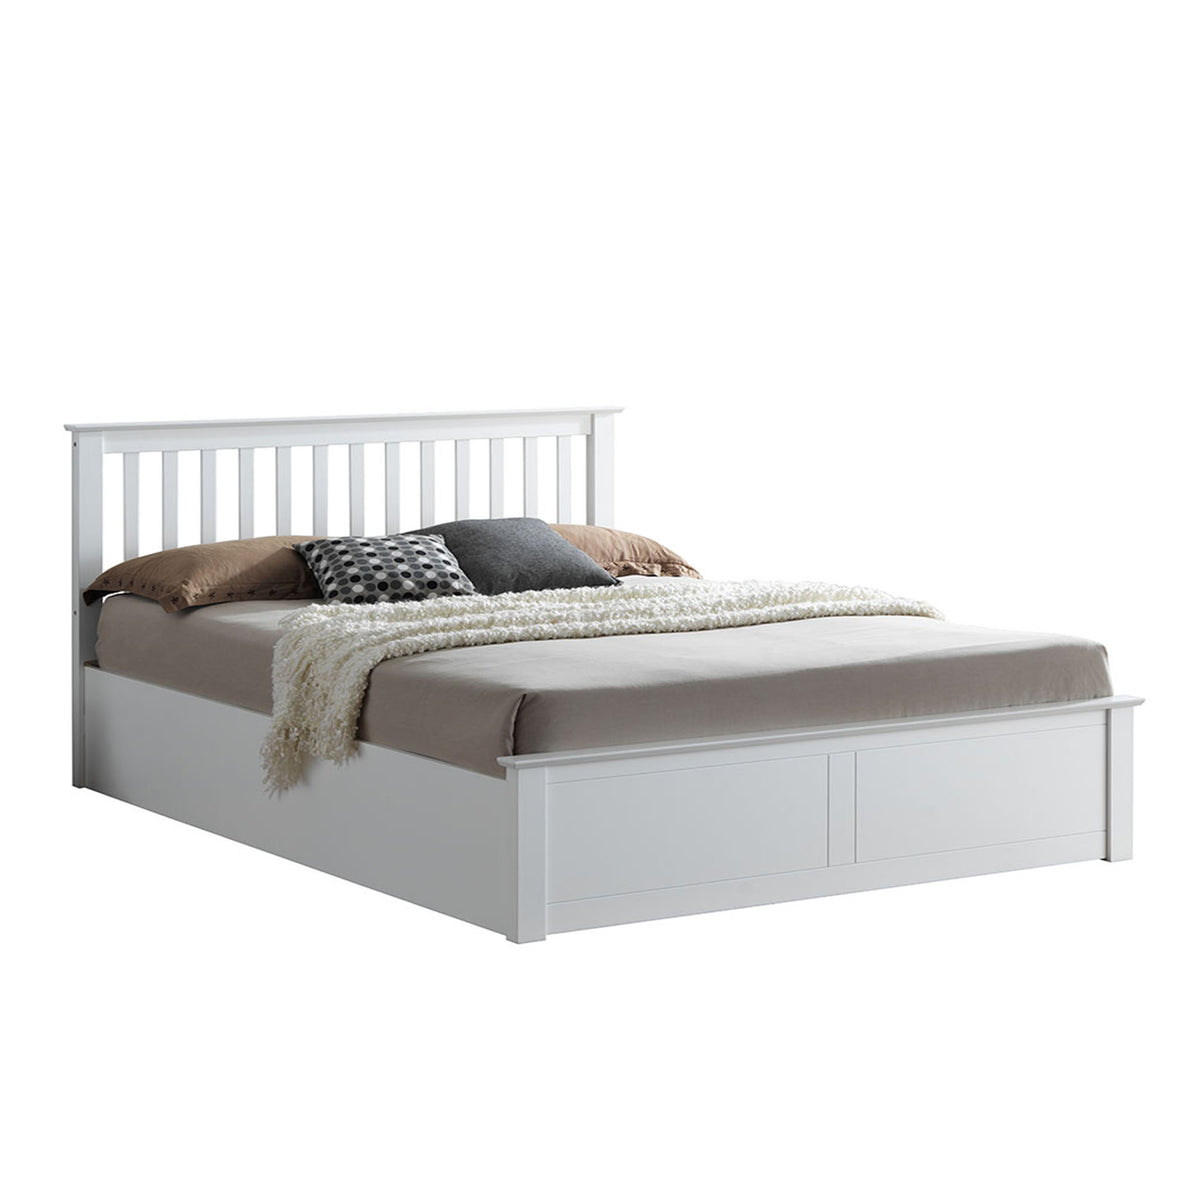  Trent White Wooden Ottoman King Size Bed 